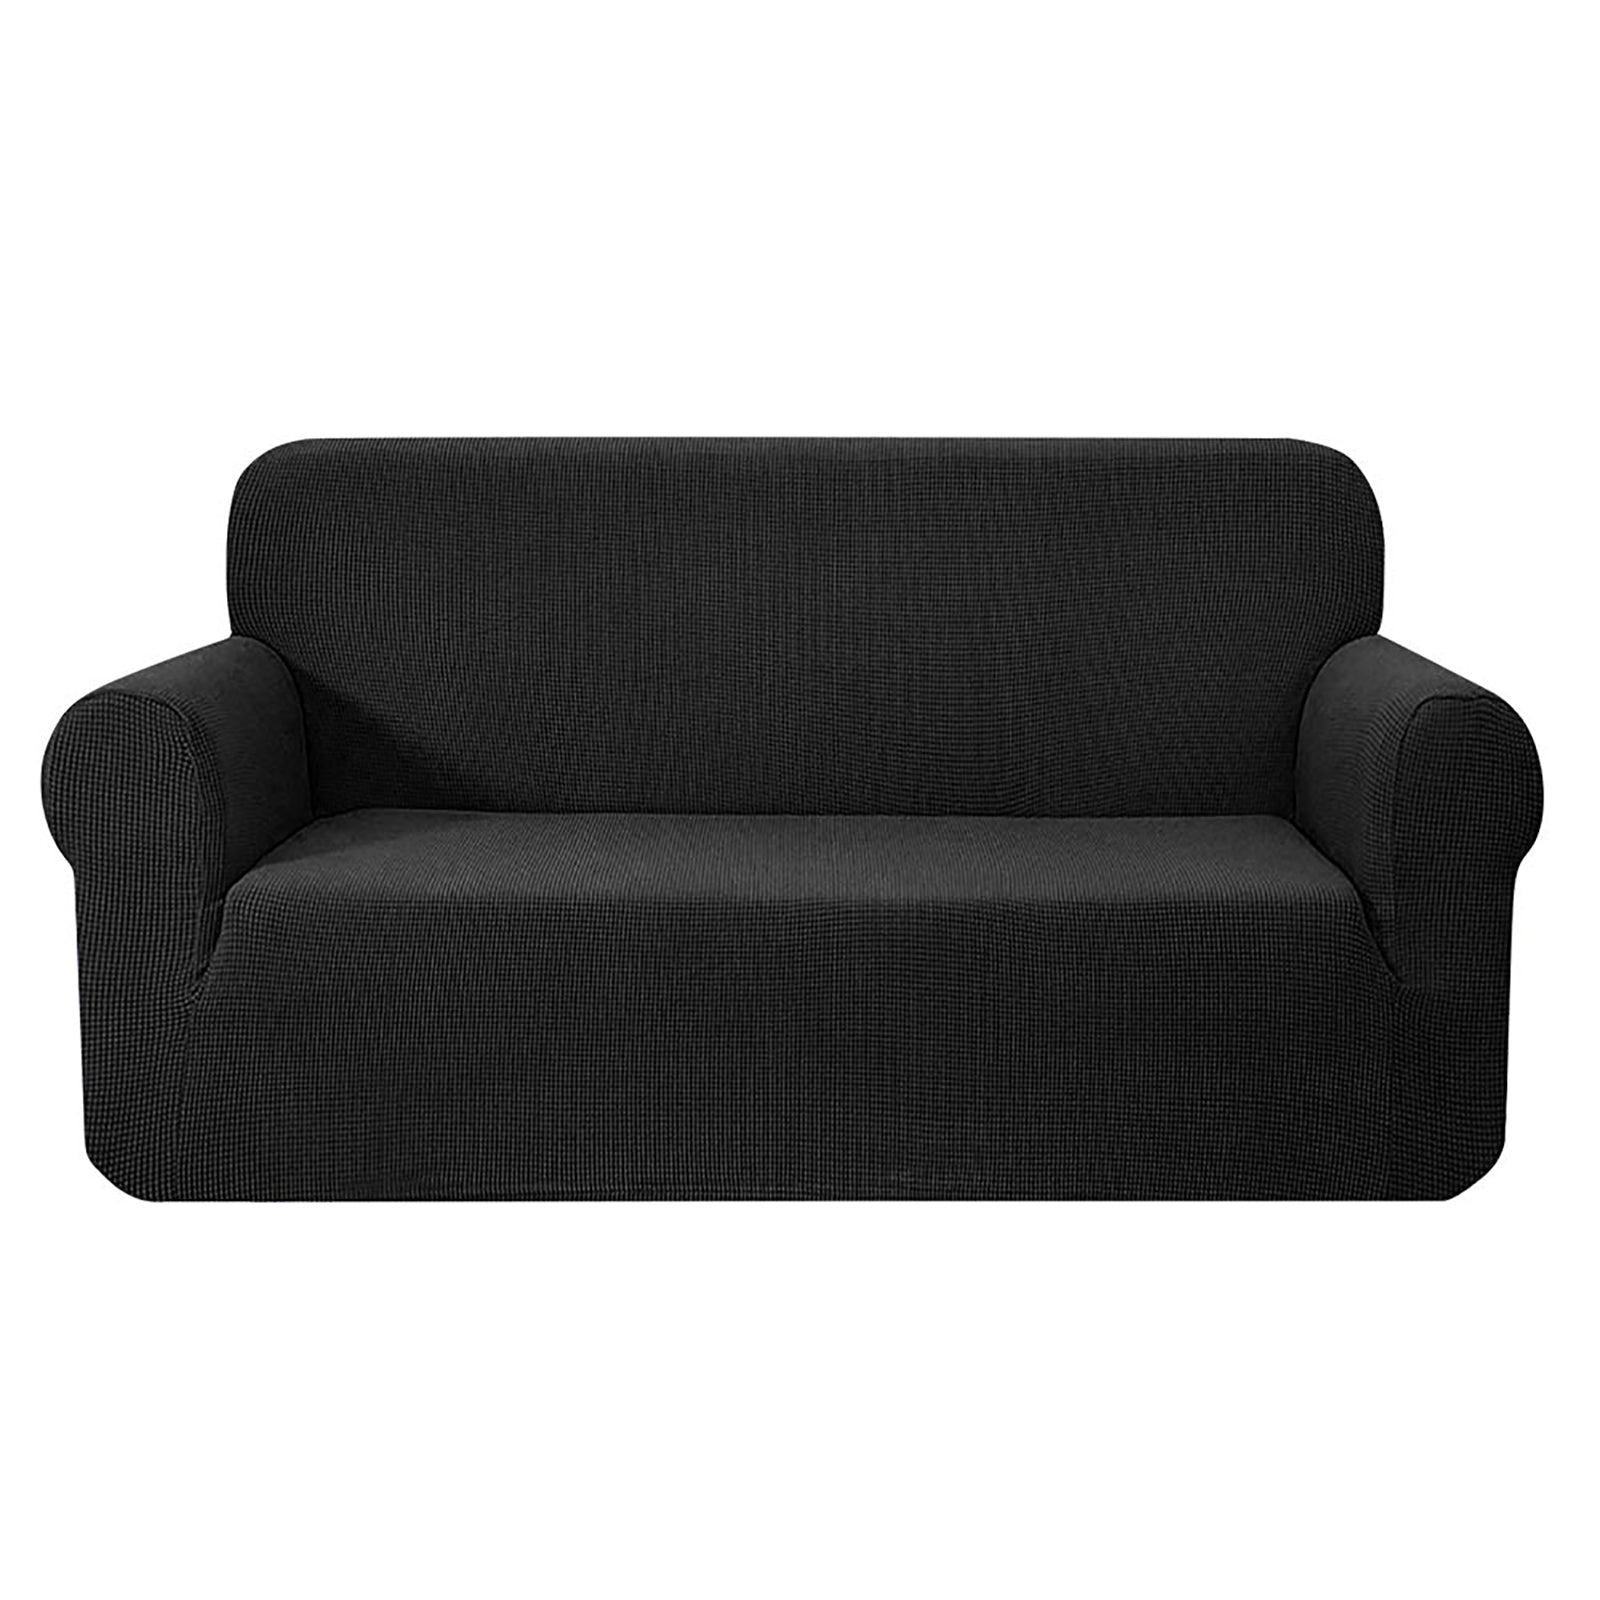 Artiss High Stretch Sofa Cover Couch Protector Slipcovers 3 Seater Black - Newstart Furniture